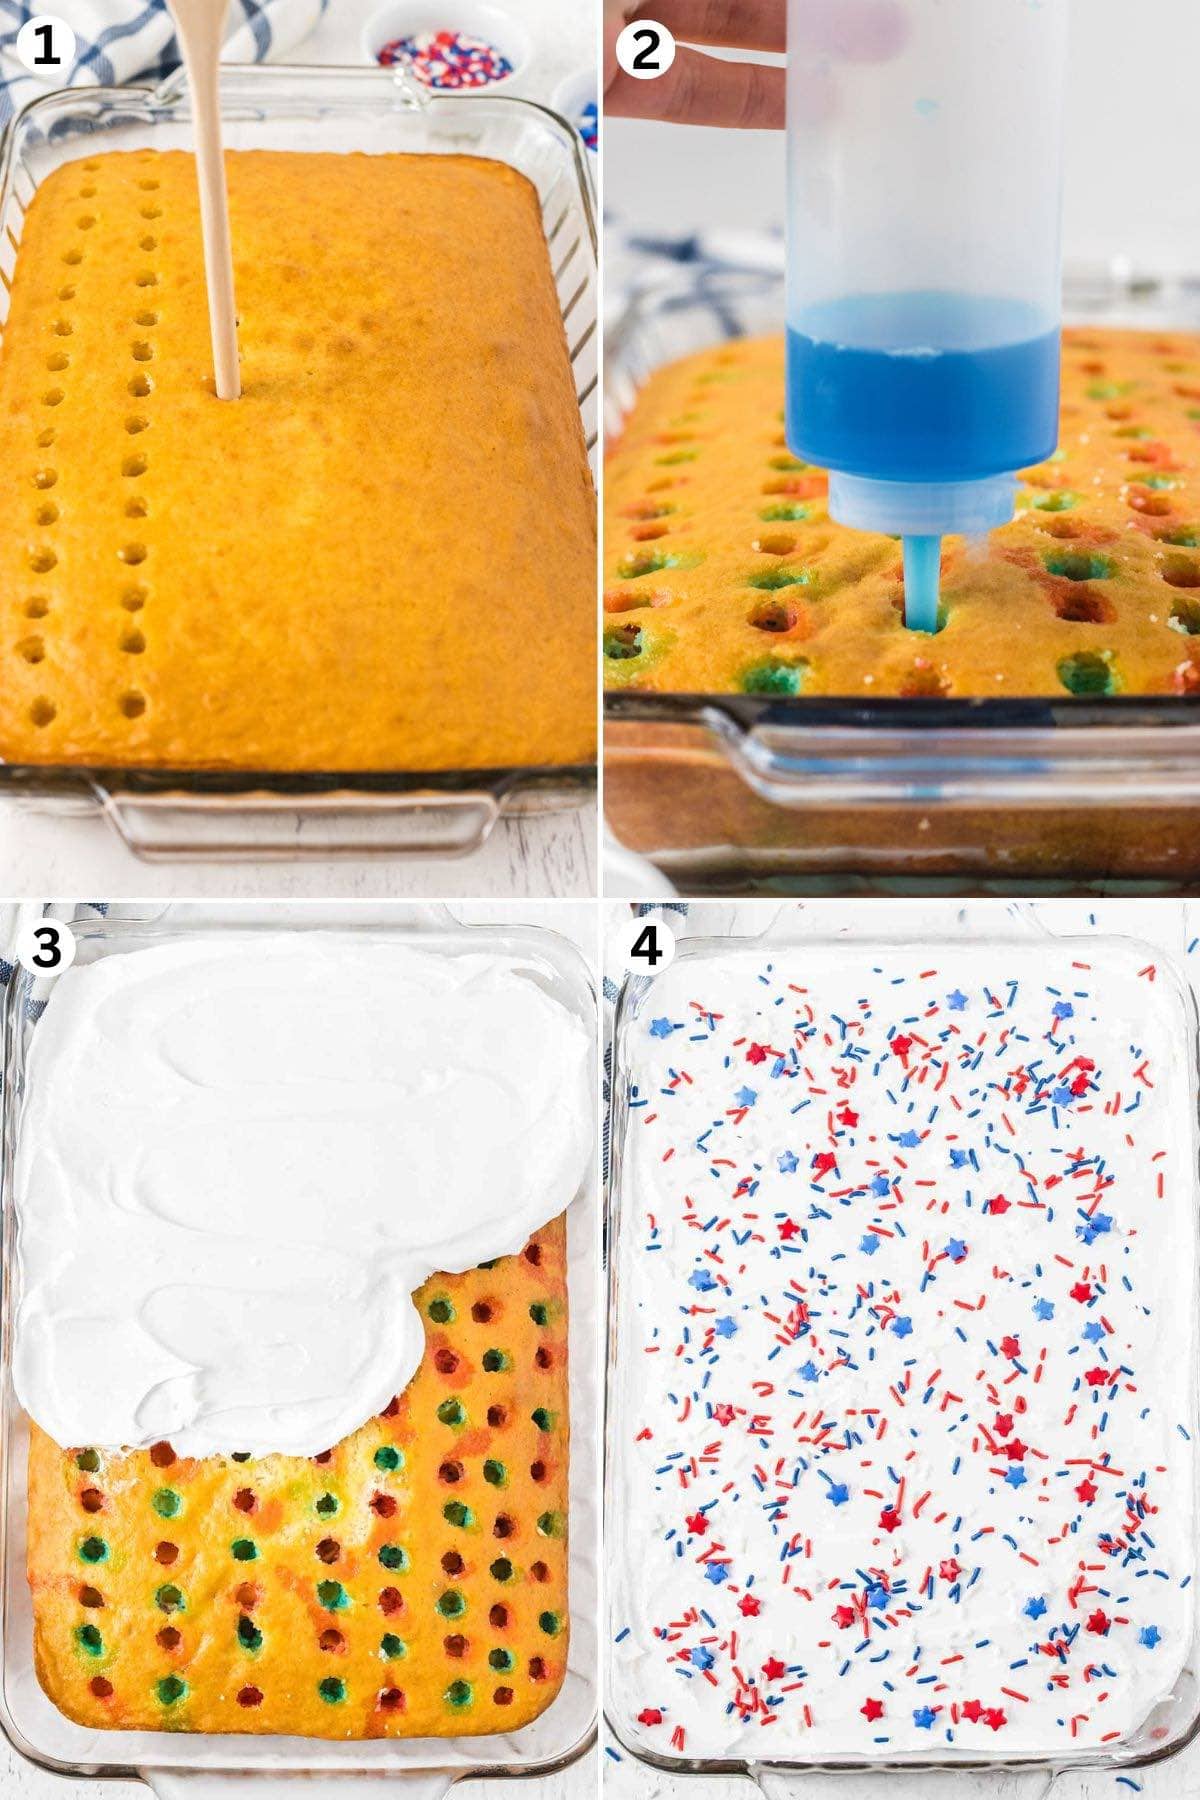 poke holes into the cake mix. pour red and blue jello into the cake mix. top with whipped cream and sprinkles. 